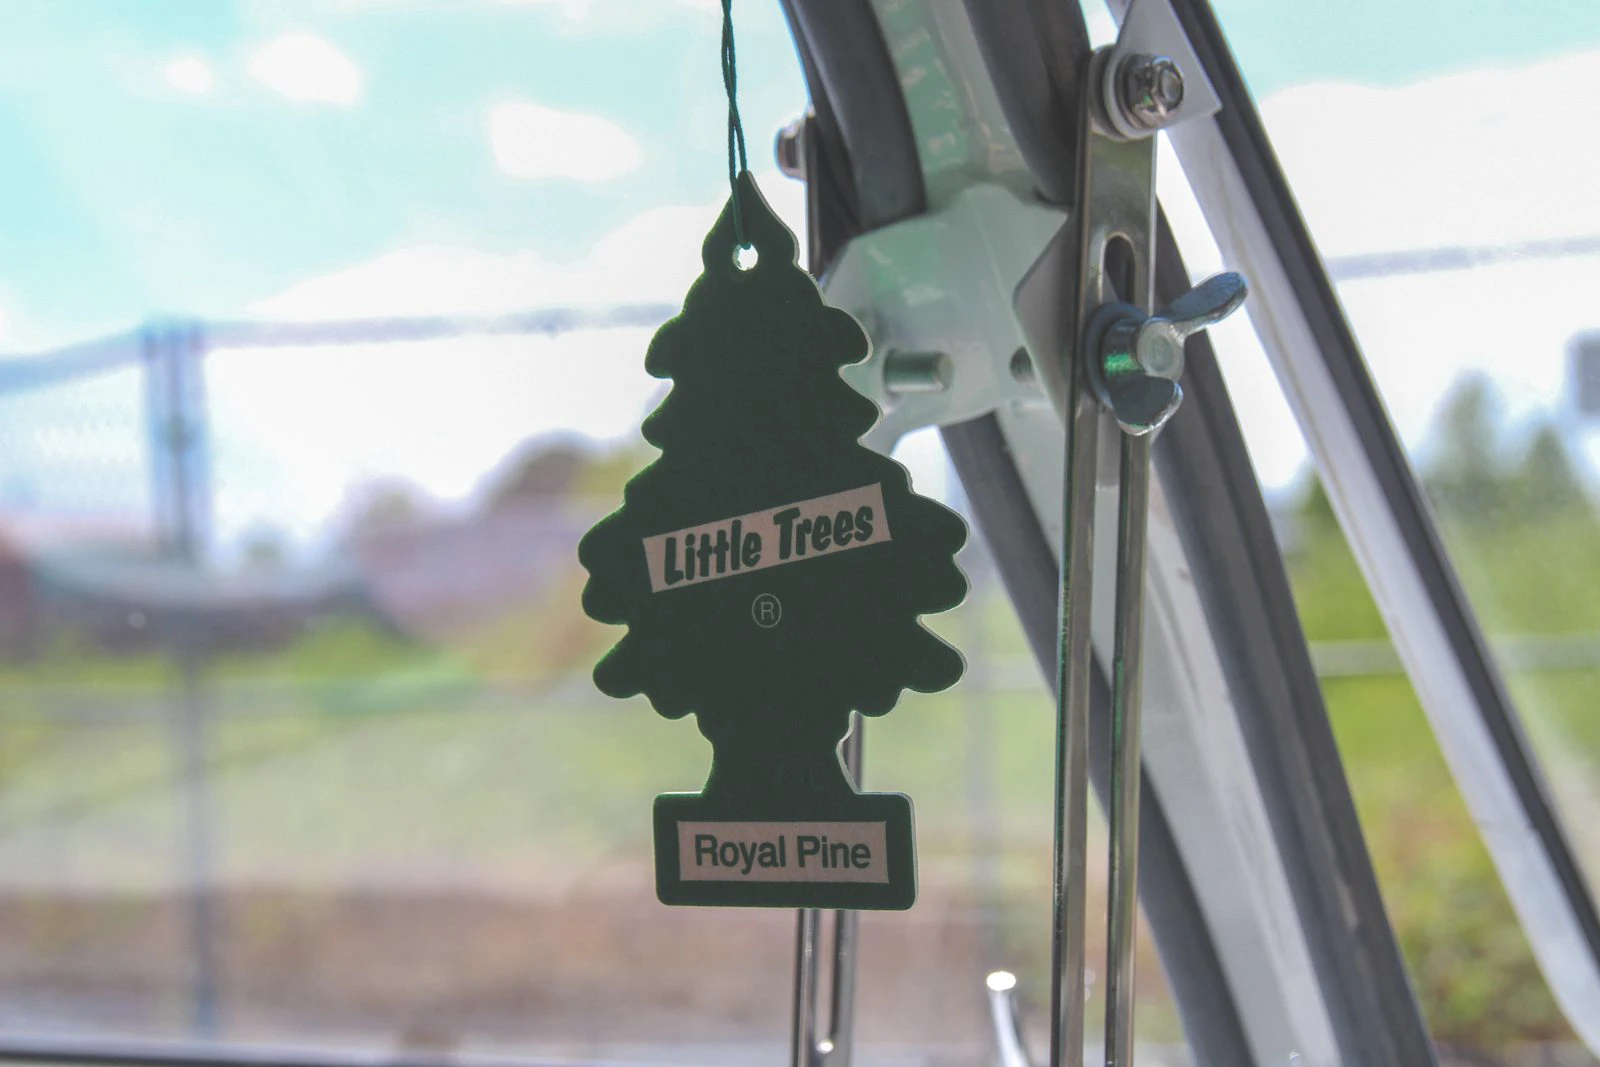 Interior of a car with a Little Tree air freshener